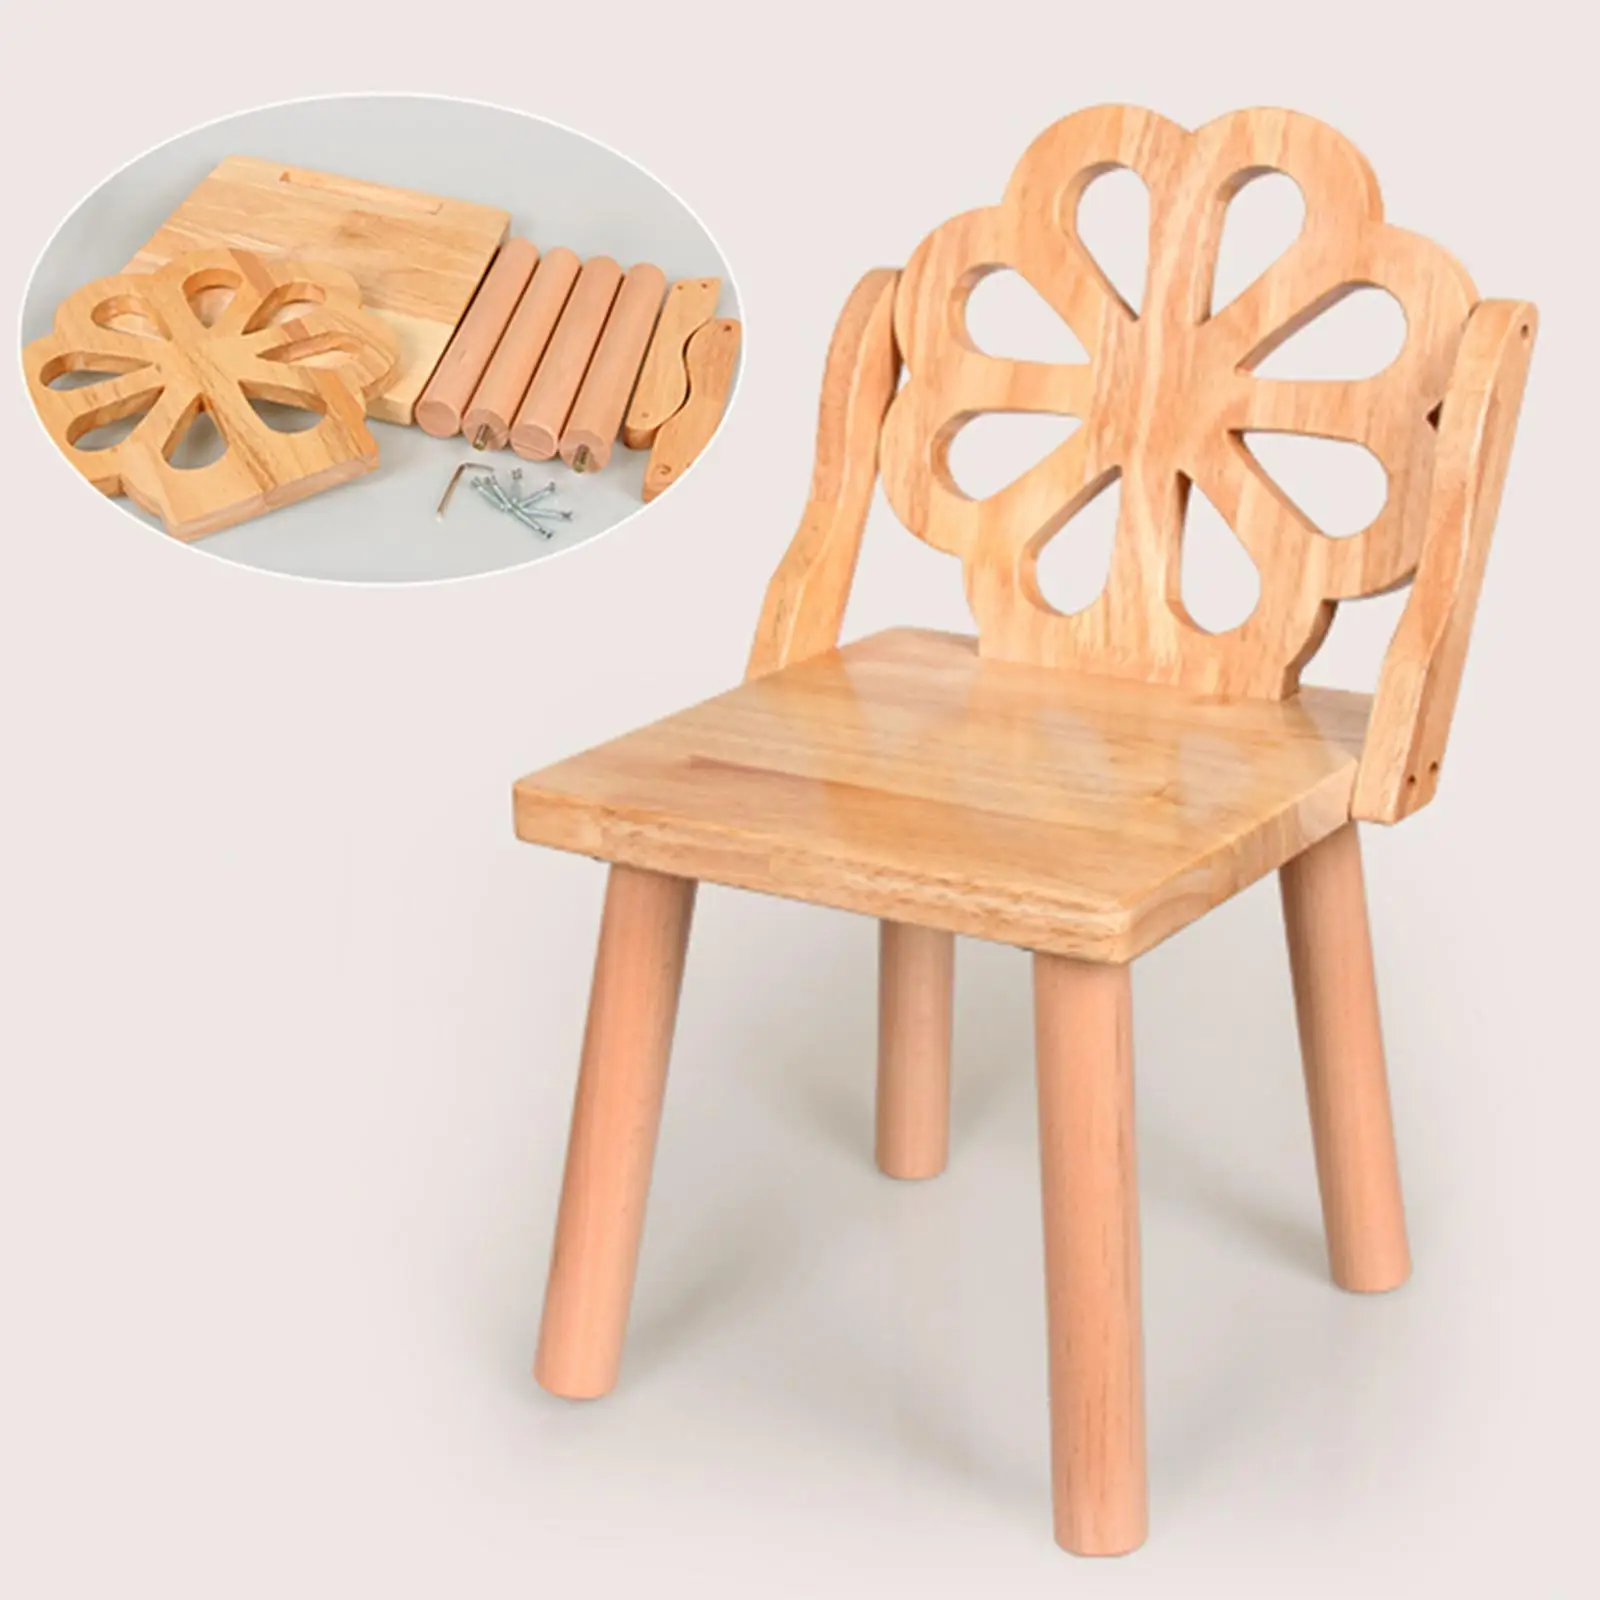 Protable Removable Wooden Child Stool Heavy Duty Storage Shelf Space Saving Wood High Chair Small Seat Stool for Kids for Home